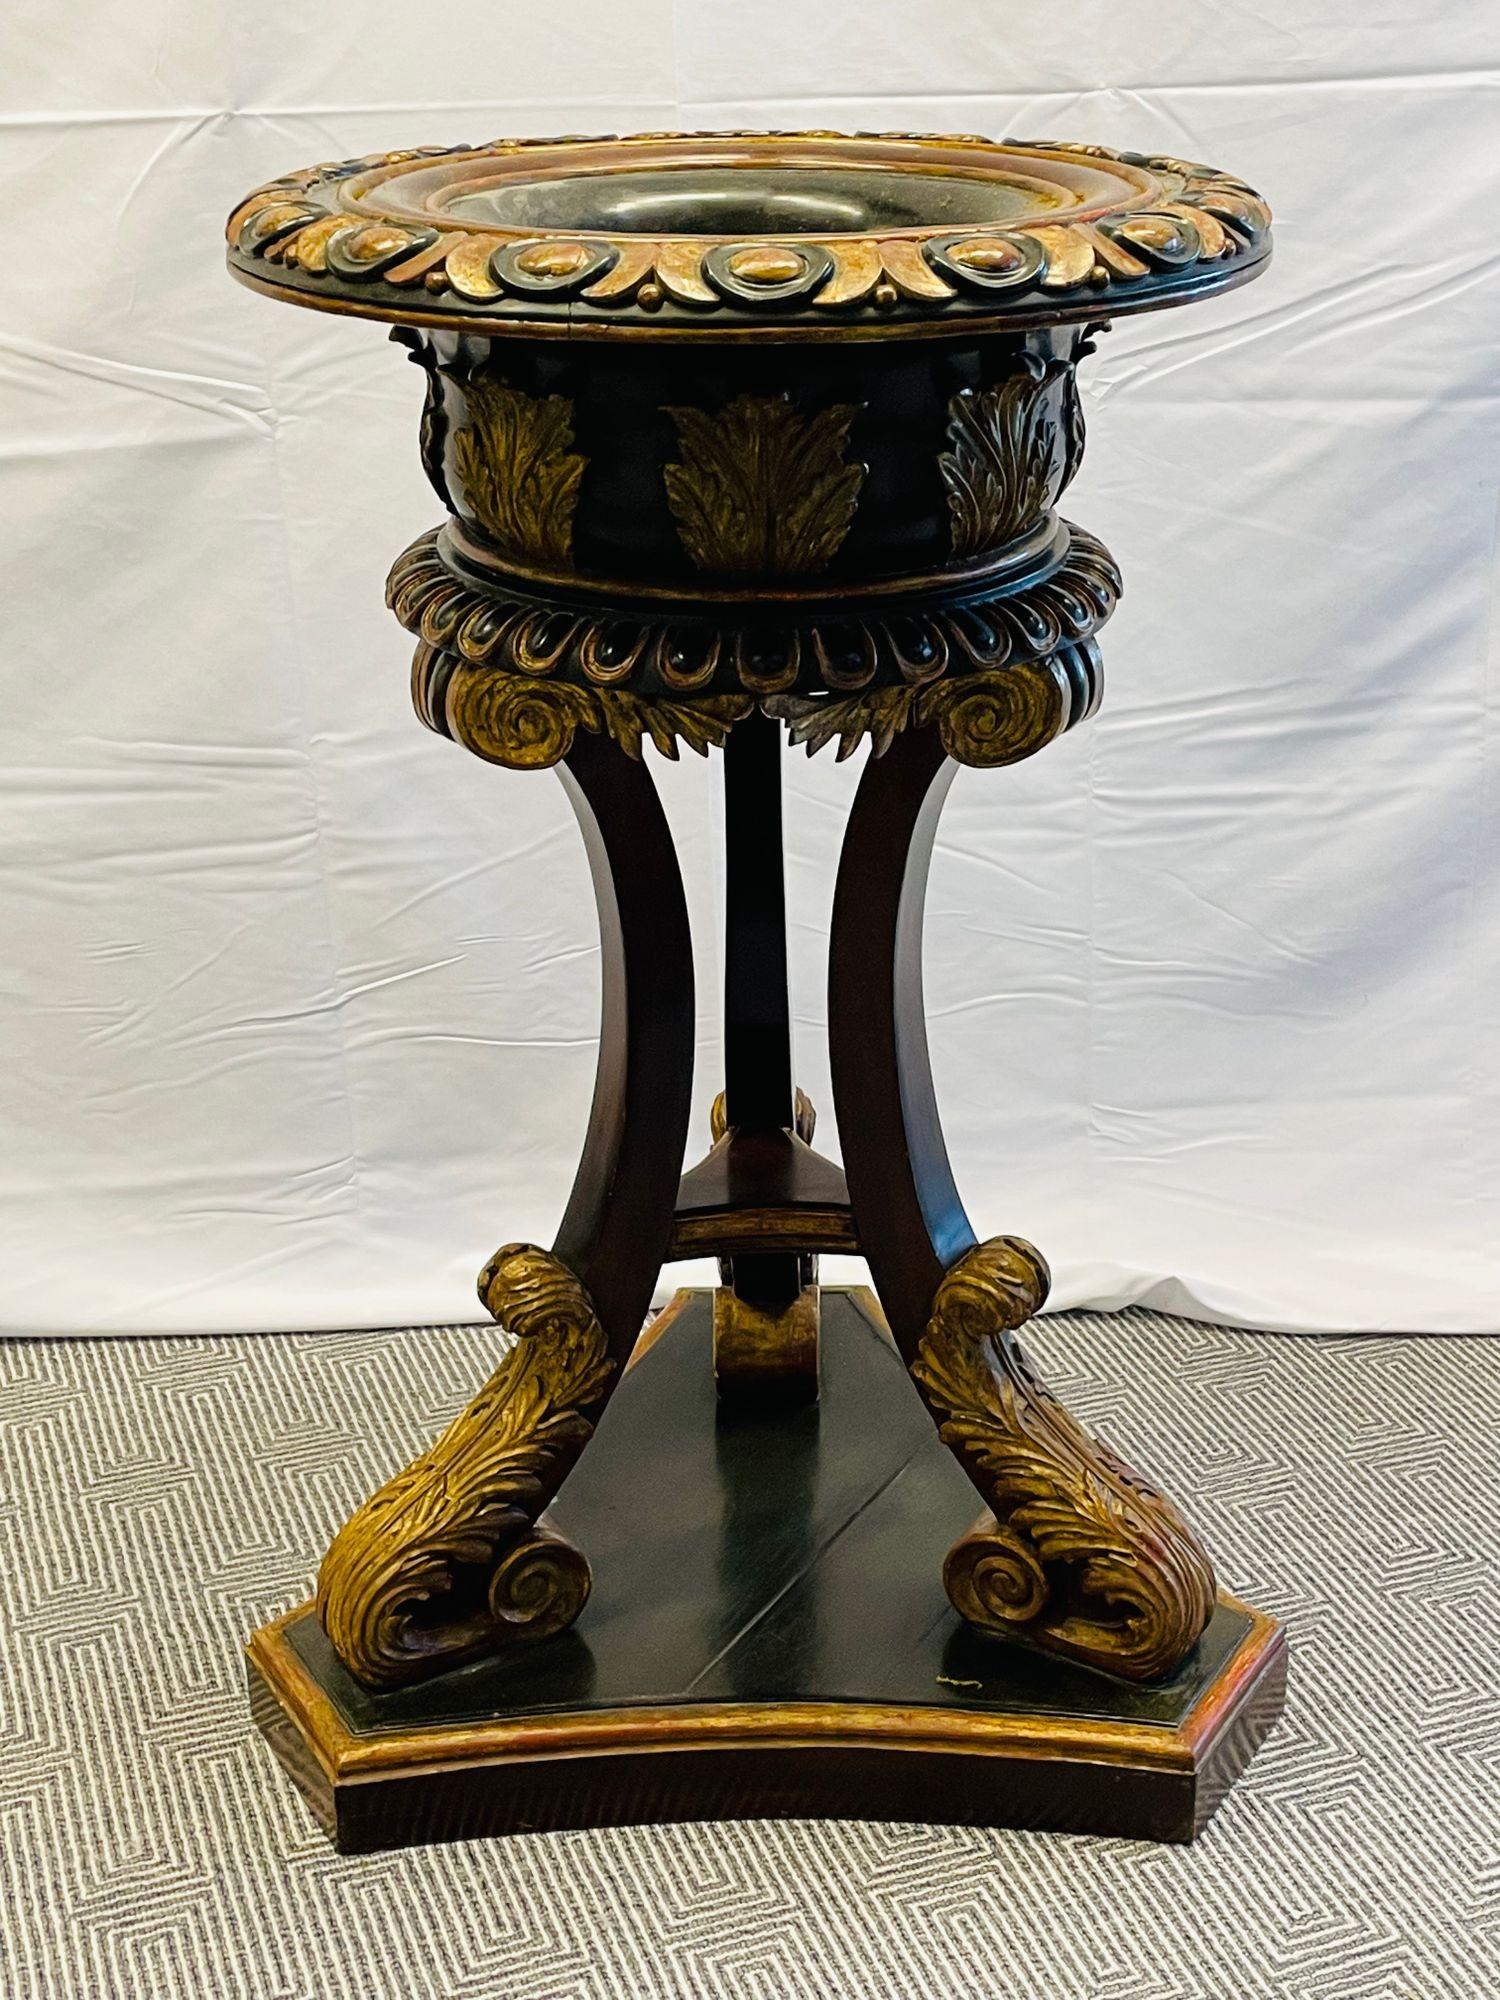 Georgian gilt wood planter, Jardinière, Ebony and gilt design
Fine period Georgian ebony and gilt decorated planter or jardiniere. The center insert planter pot rests atop a trio of gracefully curved legs which are themselves supported by a